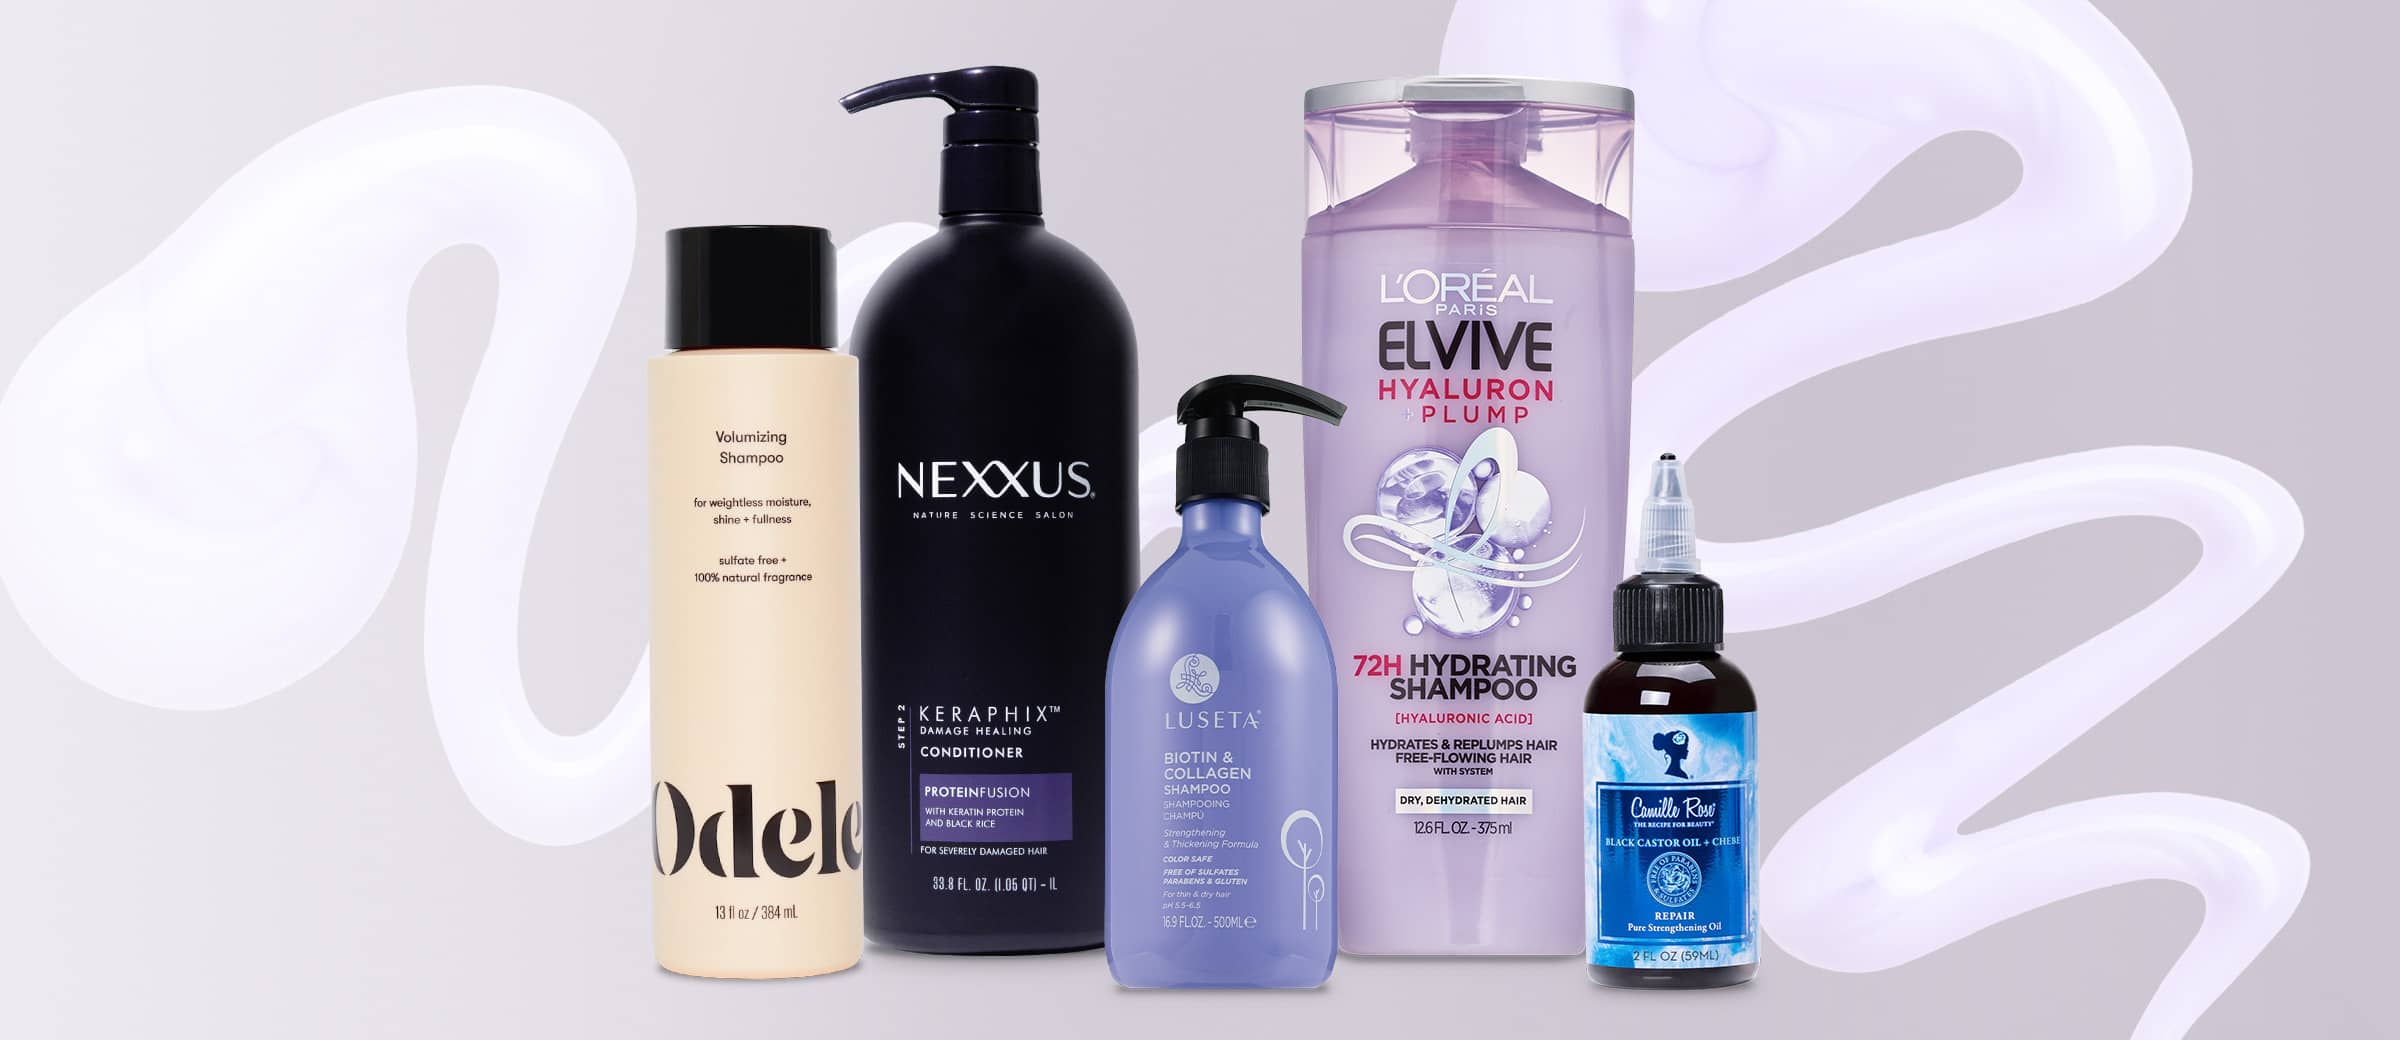 Odele, Nexxus, Luseta, L'Oréal Paris Elvive and Camille Rose hair care products